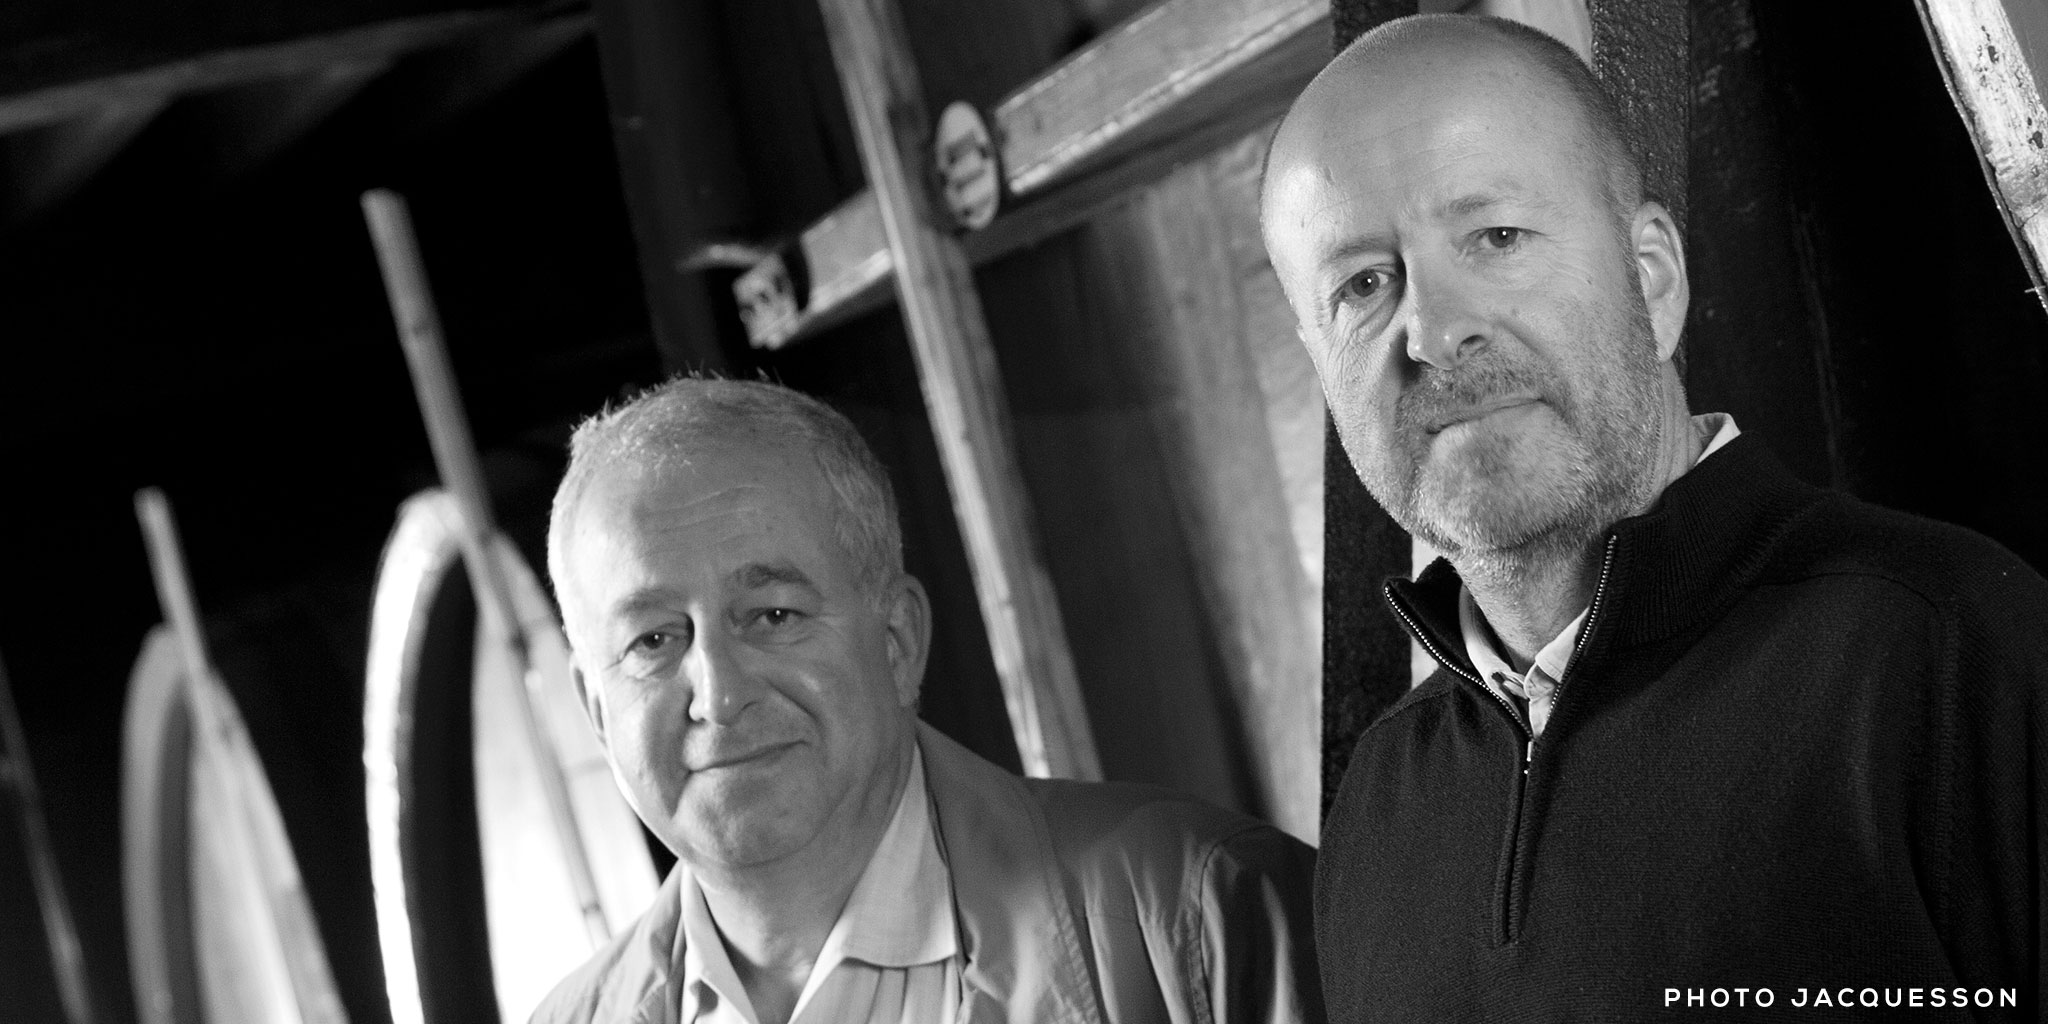 Jean-Herve and Laurent Laurent Chiquet of JACQUESSON champagne